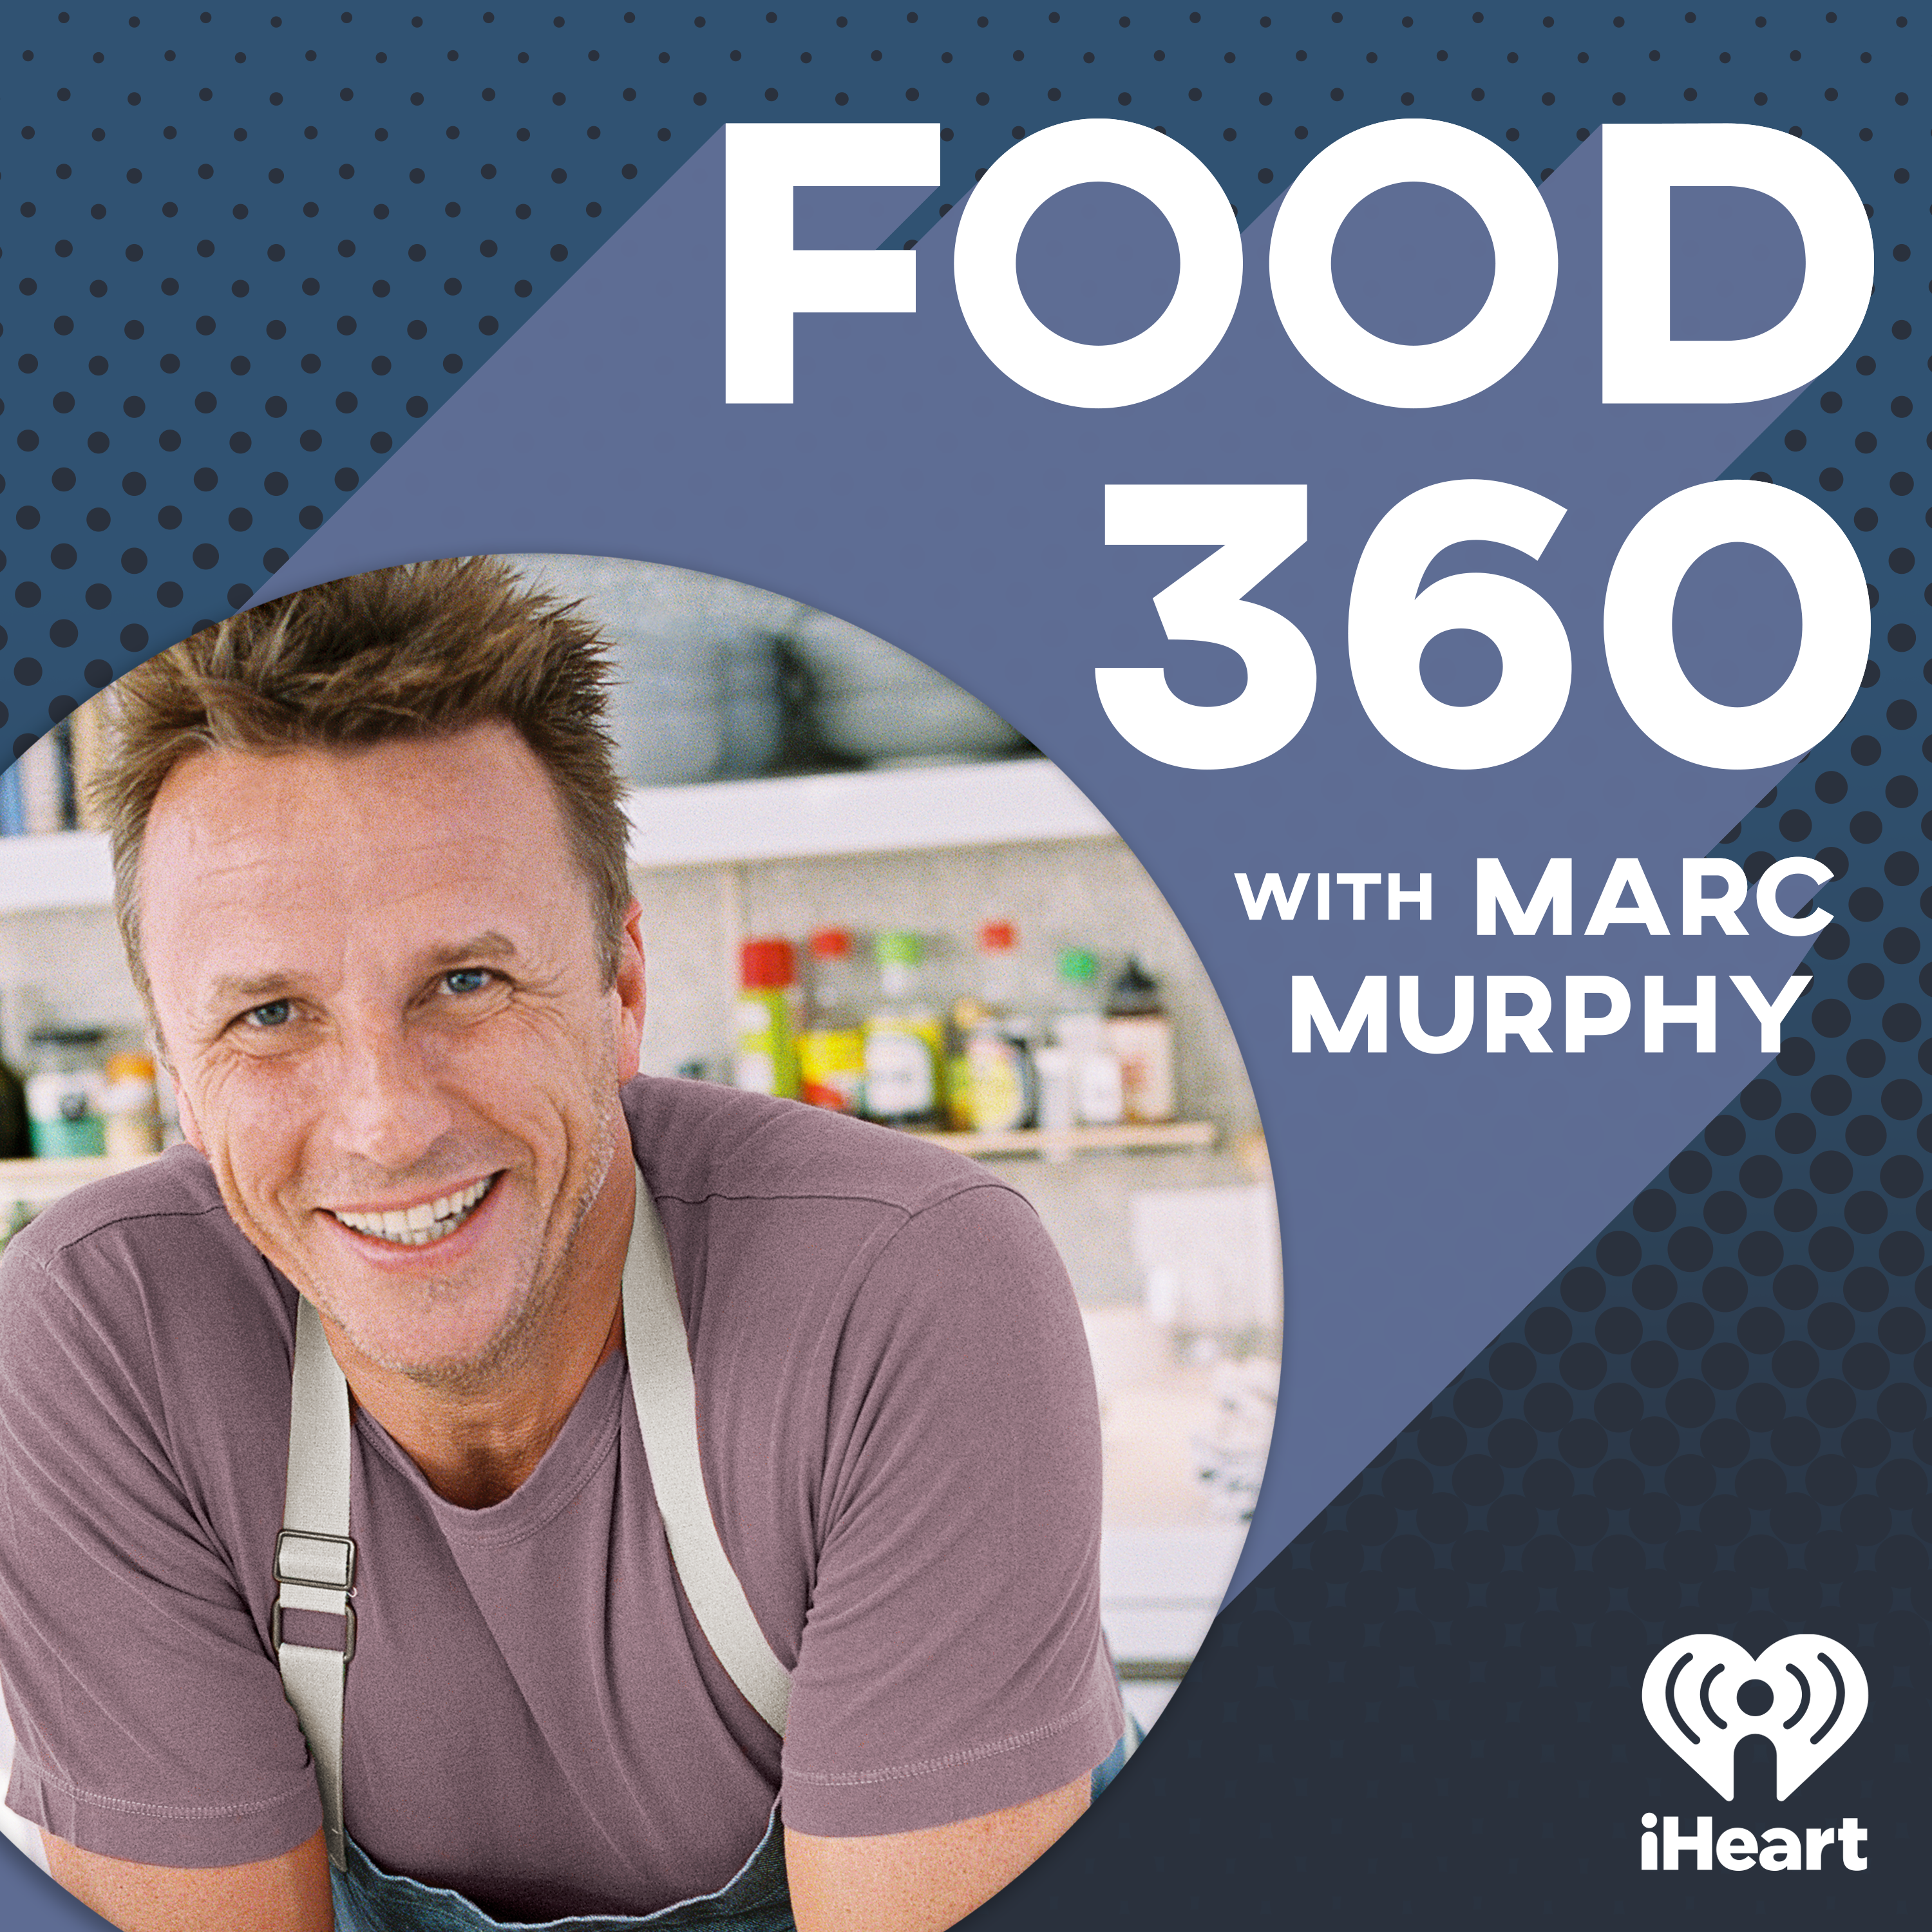 Food 360 Live with Chef David Rose